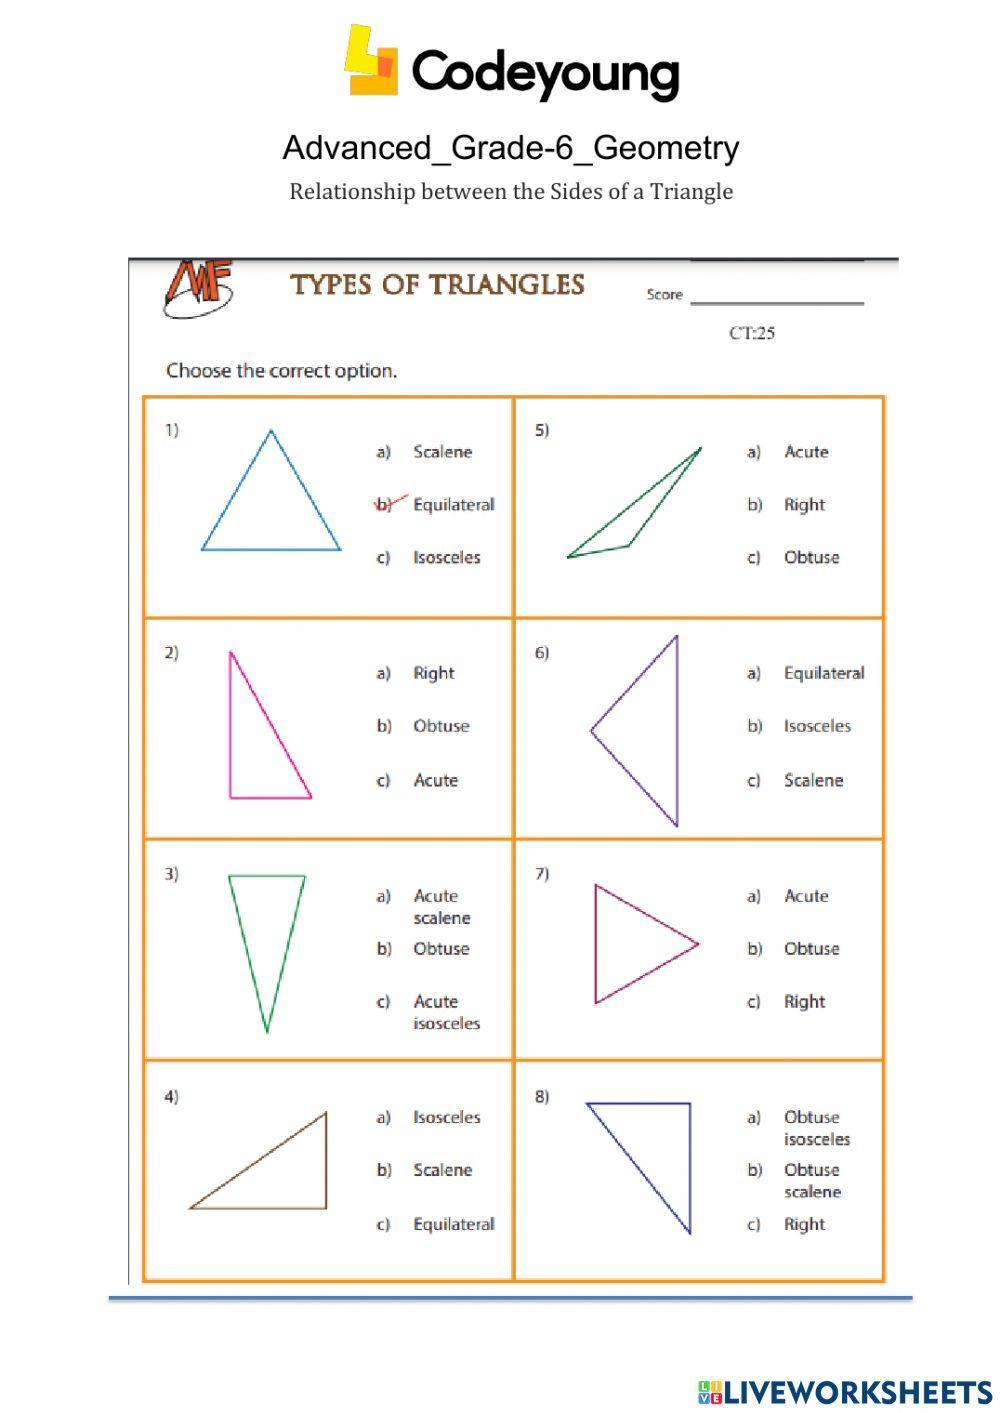 Relationship between the Sides of a Triangle Advanced